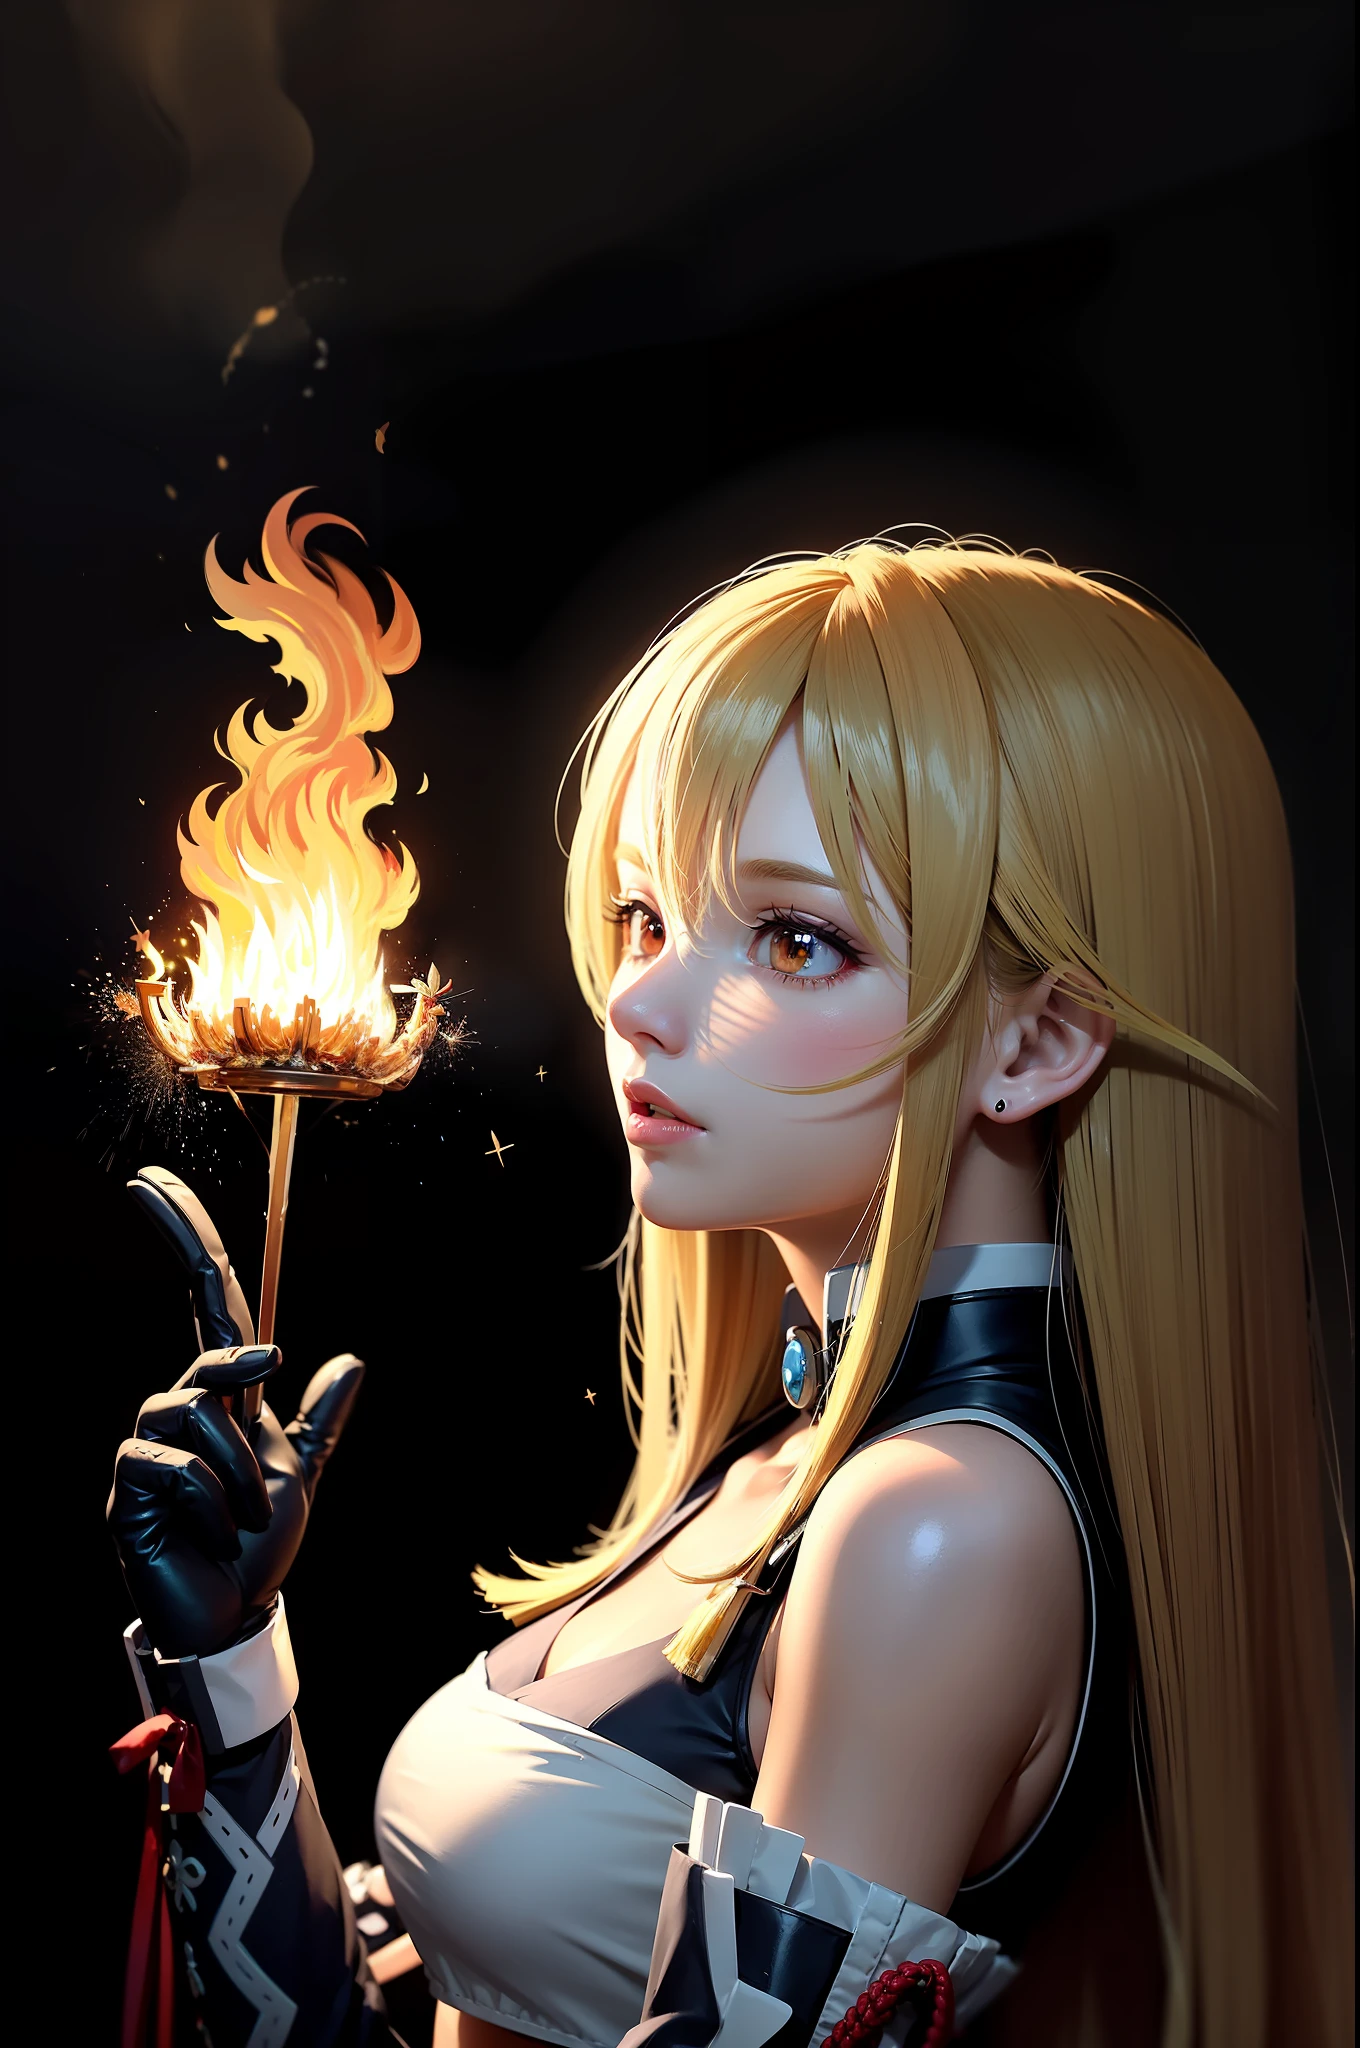 (8k, OriginalPhoto, Best quality, Masterpiece:1.4), Colorful, ultra detaile, Particle, Depth of field, Portrait, [sketch], volumettic light, ((Atmospheric light)), guangjiao, Flawless face, Flawless skin,
milla maxwell, Blonde hair, Long hair, Striped hair,  fantasy,  Fire magic, fire ball, looking  at viewer, casting spell, Standing,  ((Fire butterflies, flying sparks, Flames)),